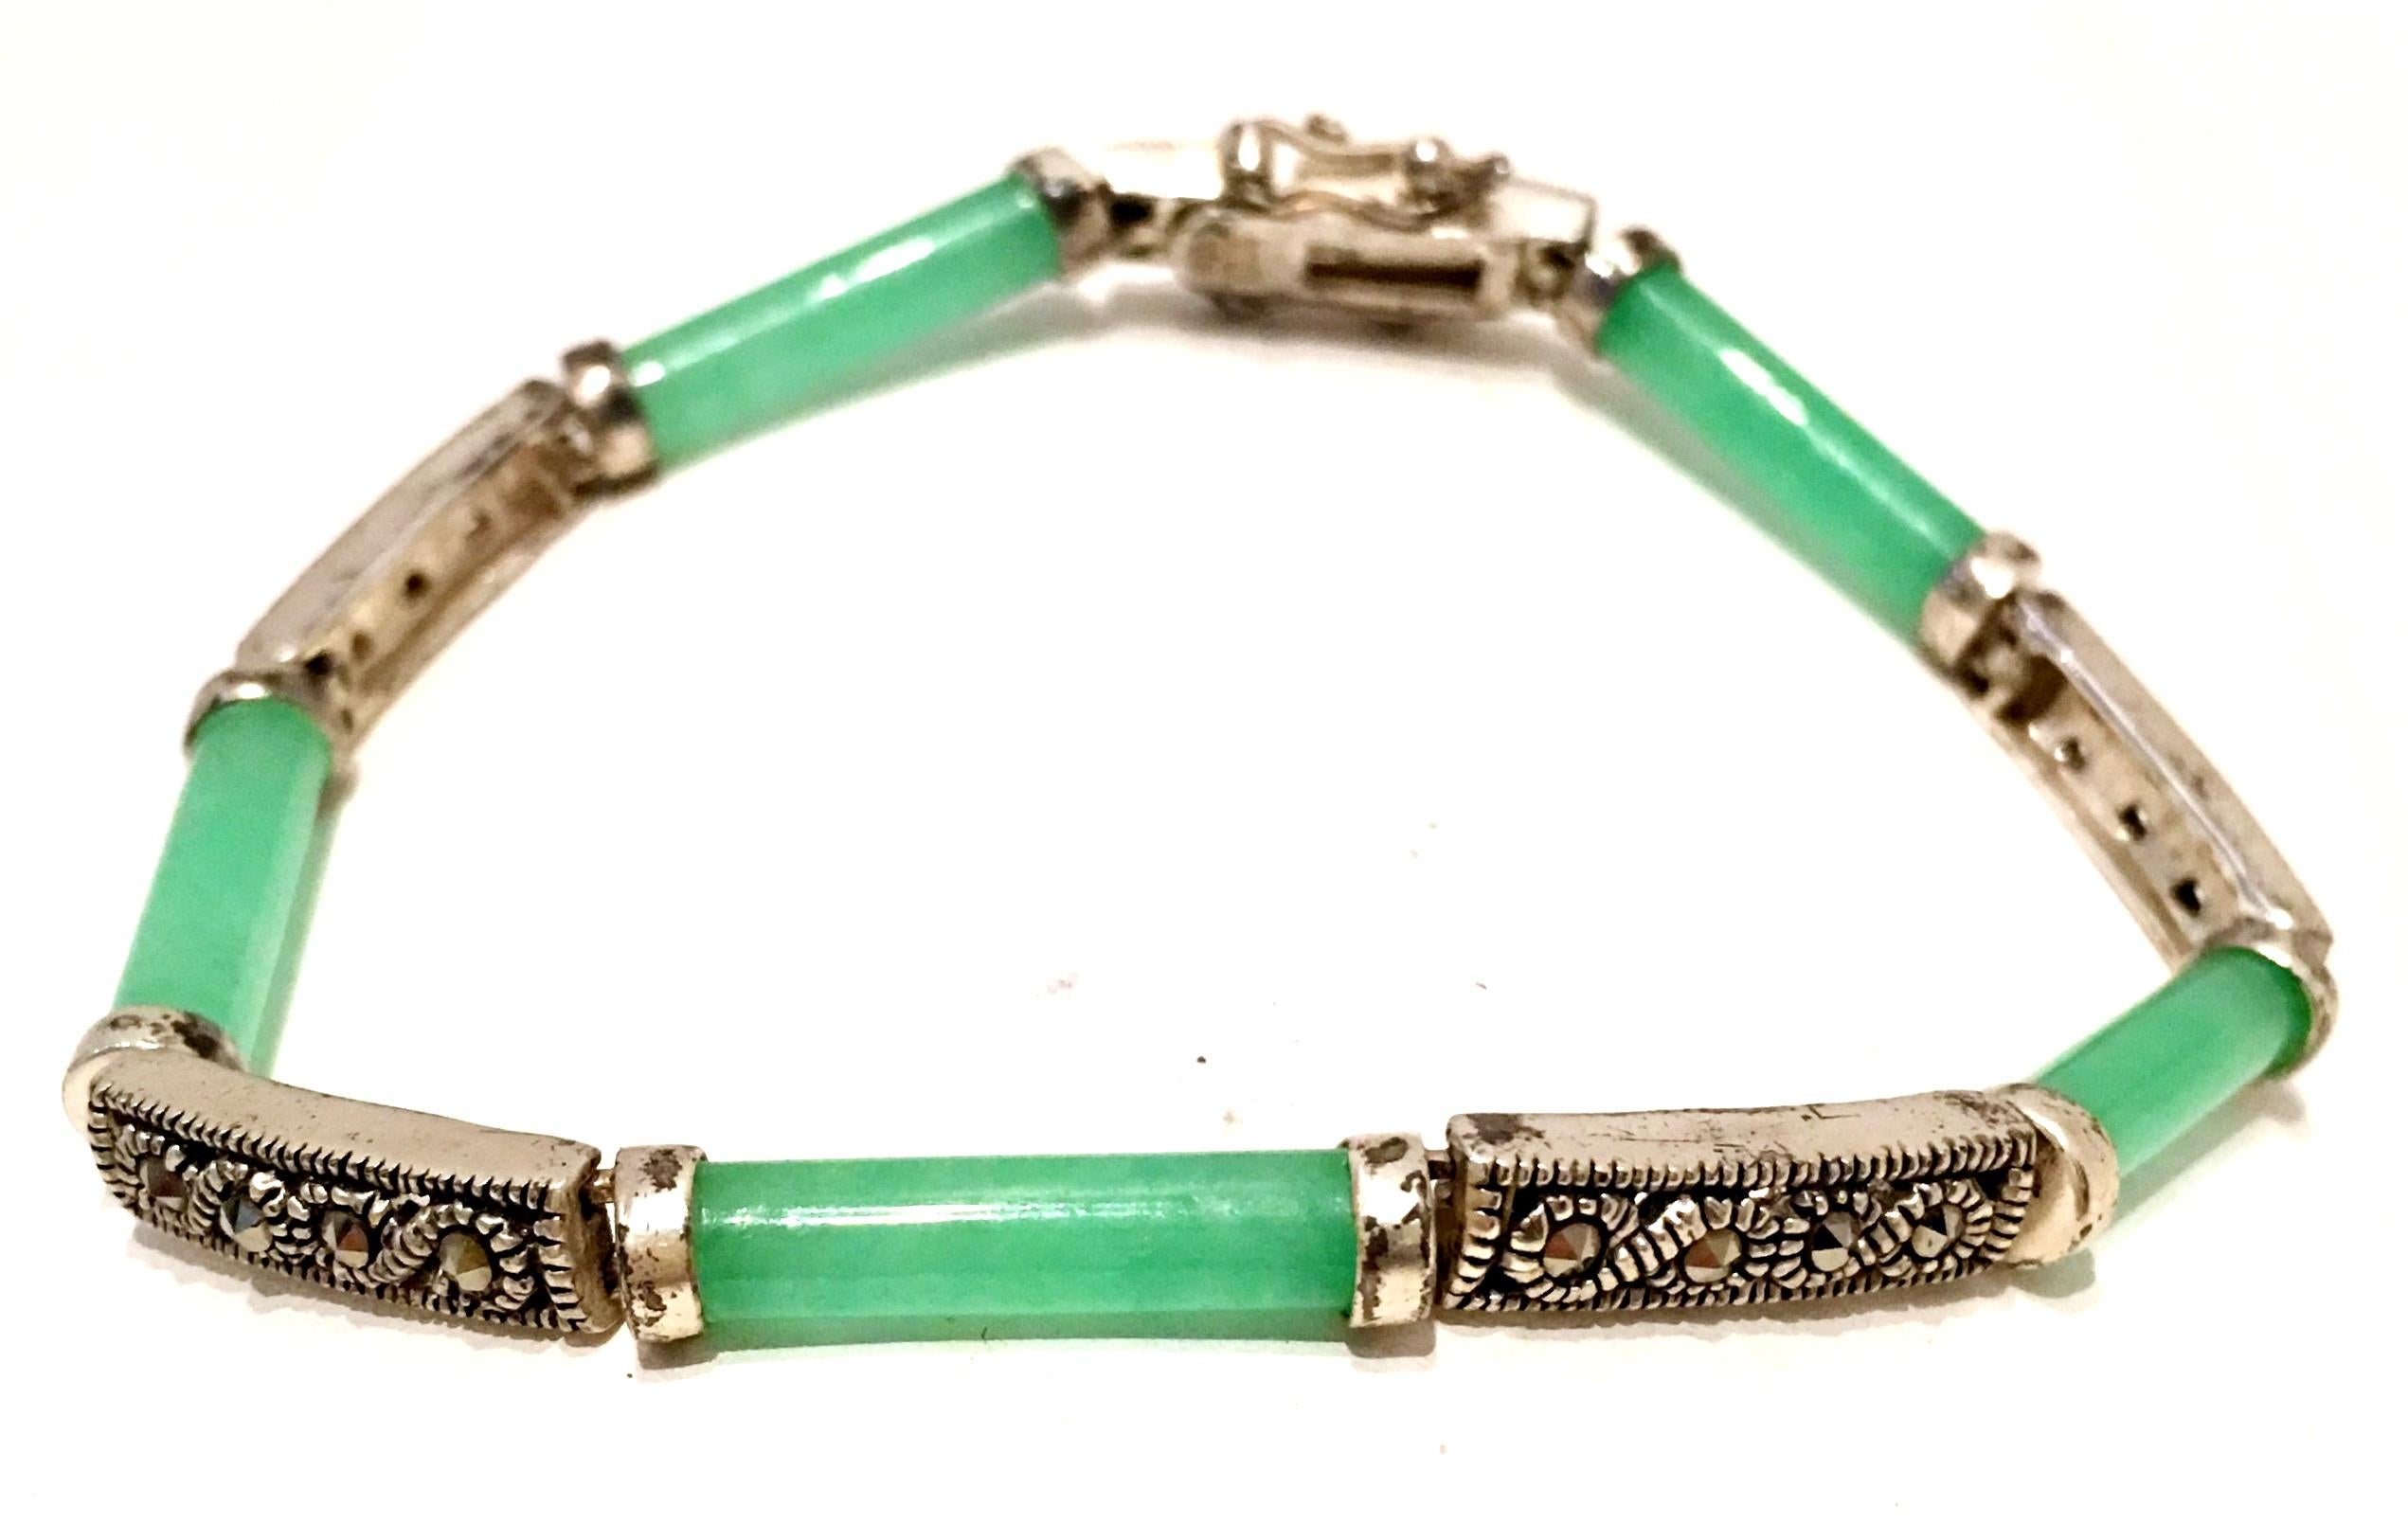 20th Century Chinese 925 Sterling Silver, Jadeite And Marcasite Link Bracelet. Features, five green jadeite links and four sterling with four marcasite stones each. Each link is approximately .75